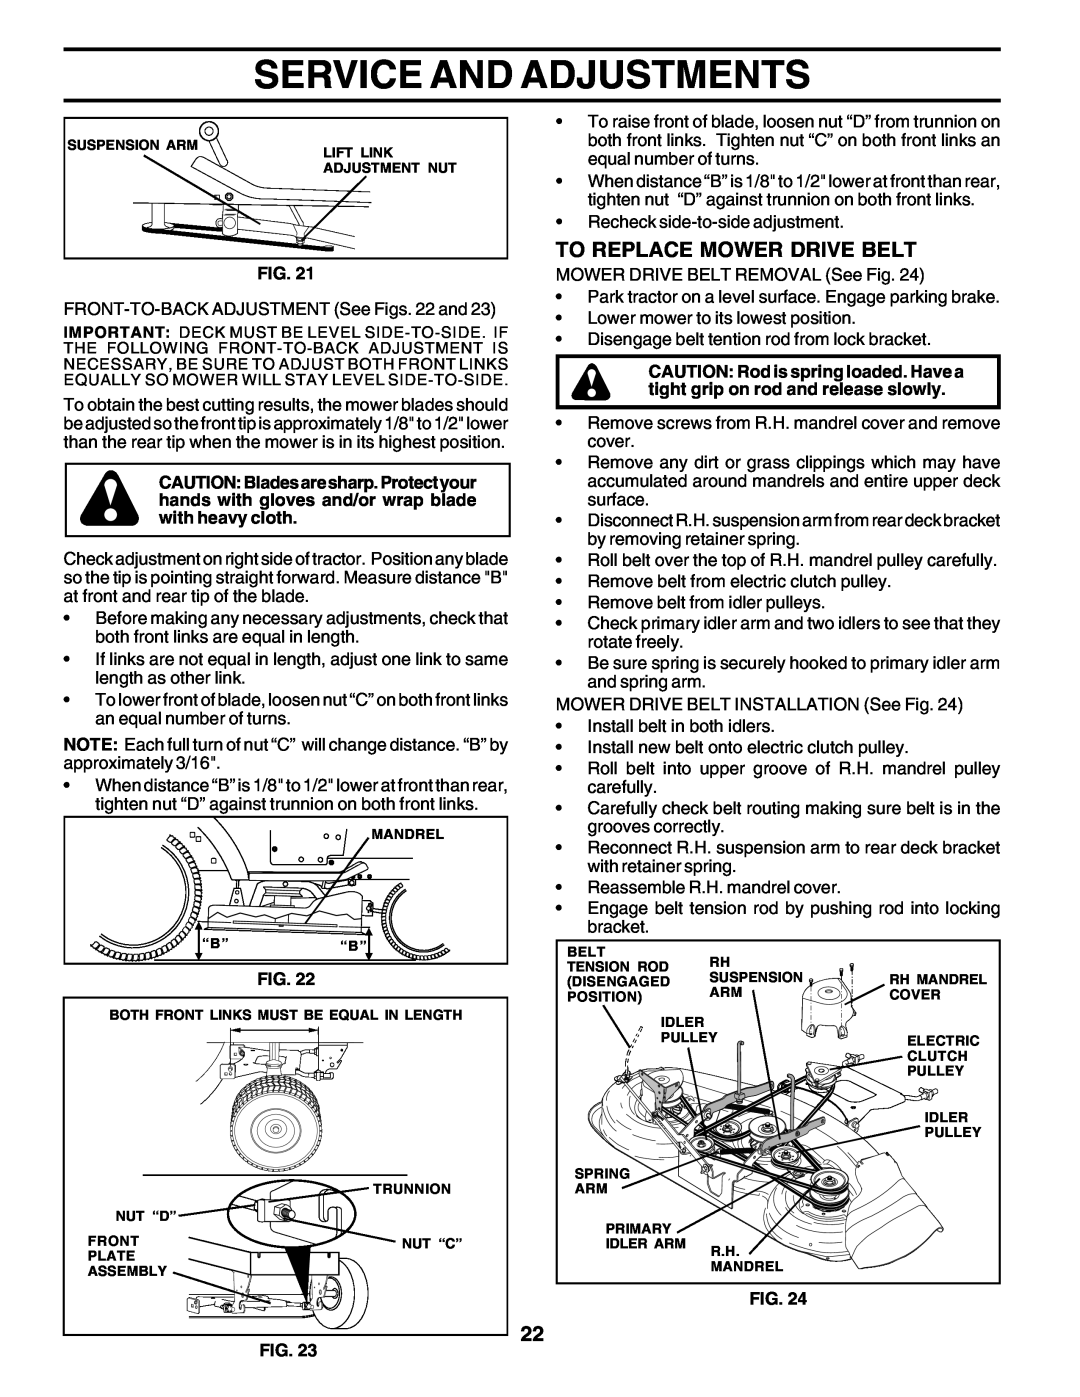 Poulan 180200 owner manual Service And Adjustments, To Replace Mower Drive Belt 